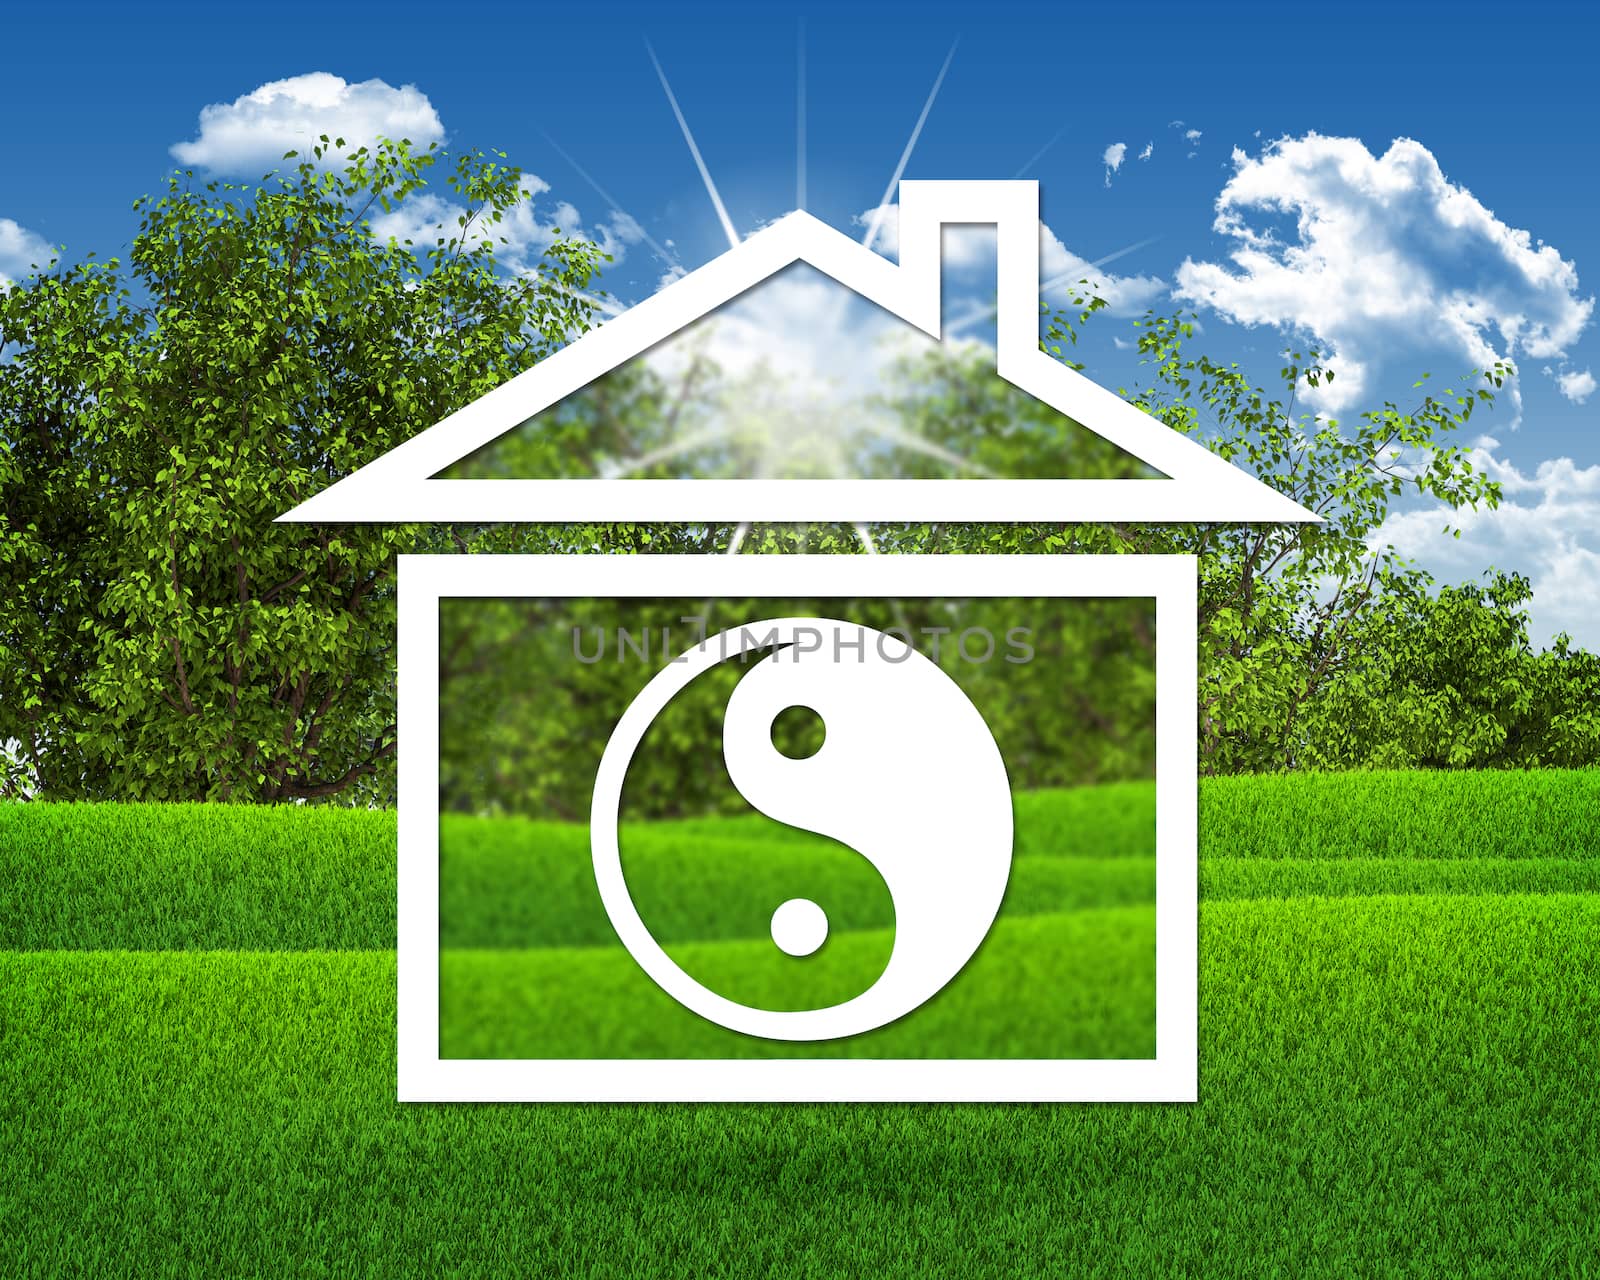 House icon with symbol of yin-yang. Green grass and blue sky as backdrop